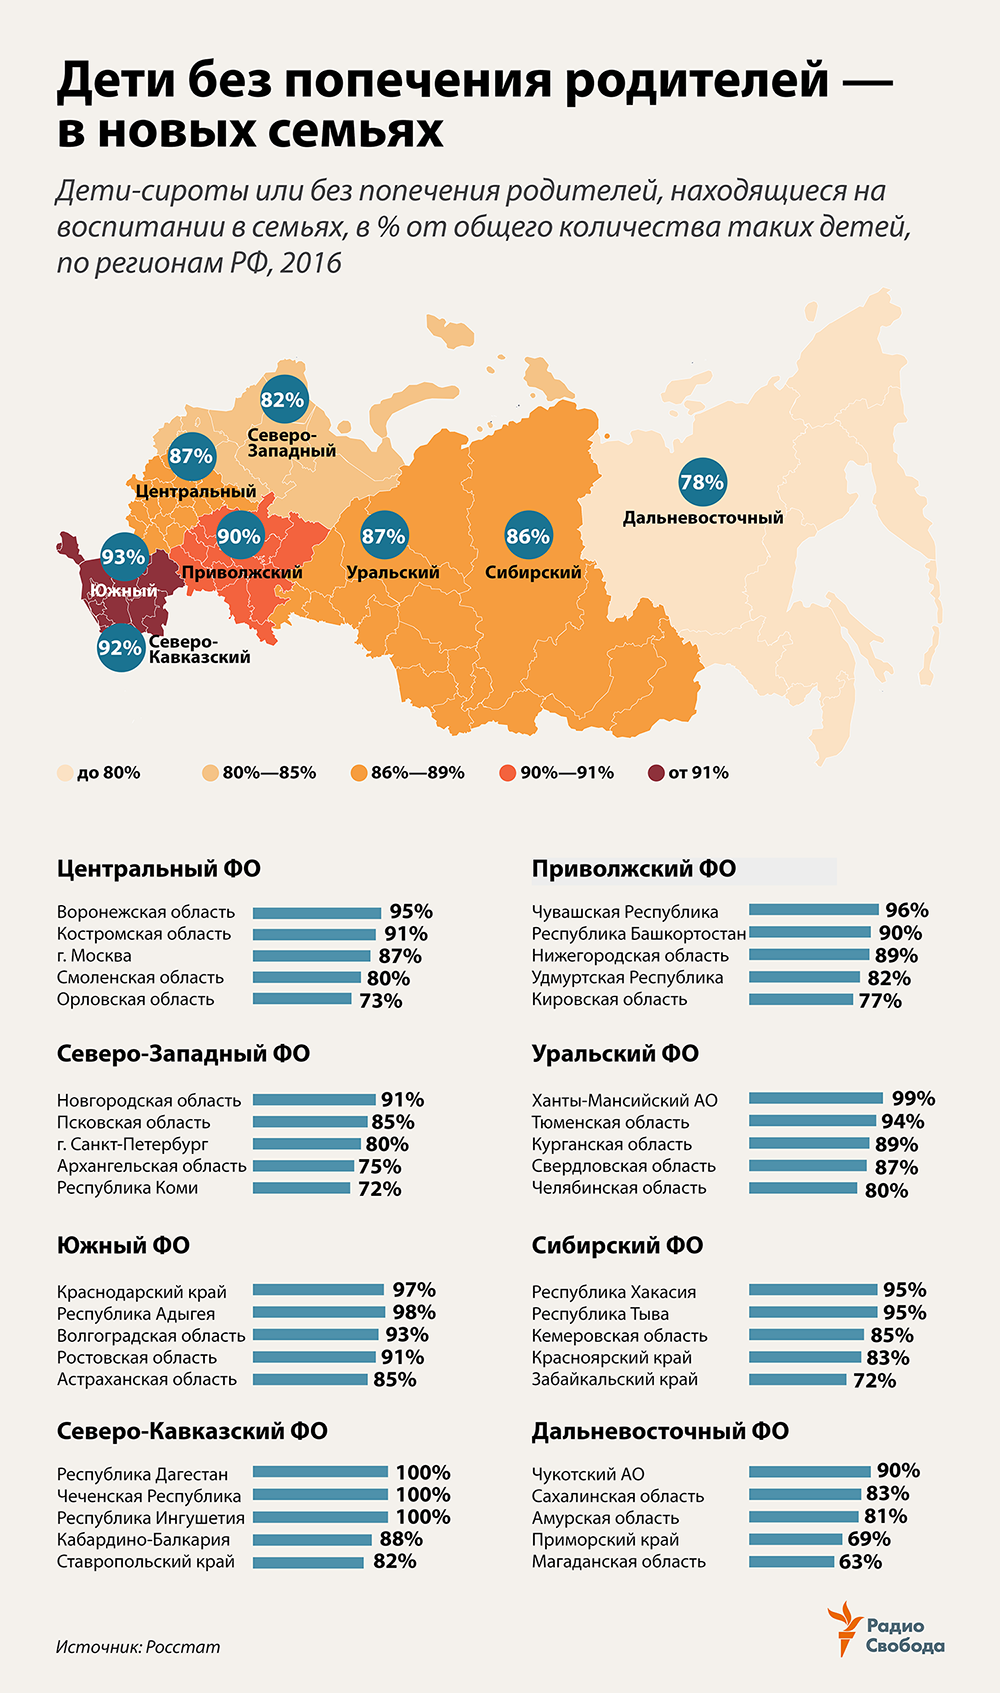 Russia-Factograph-Orphans-Foster families-Share-Regions-2016